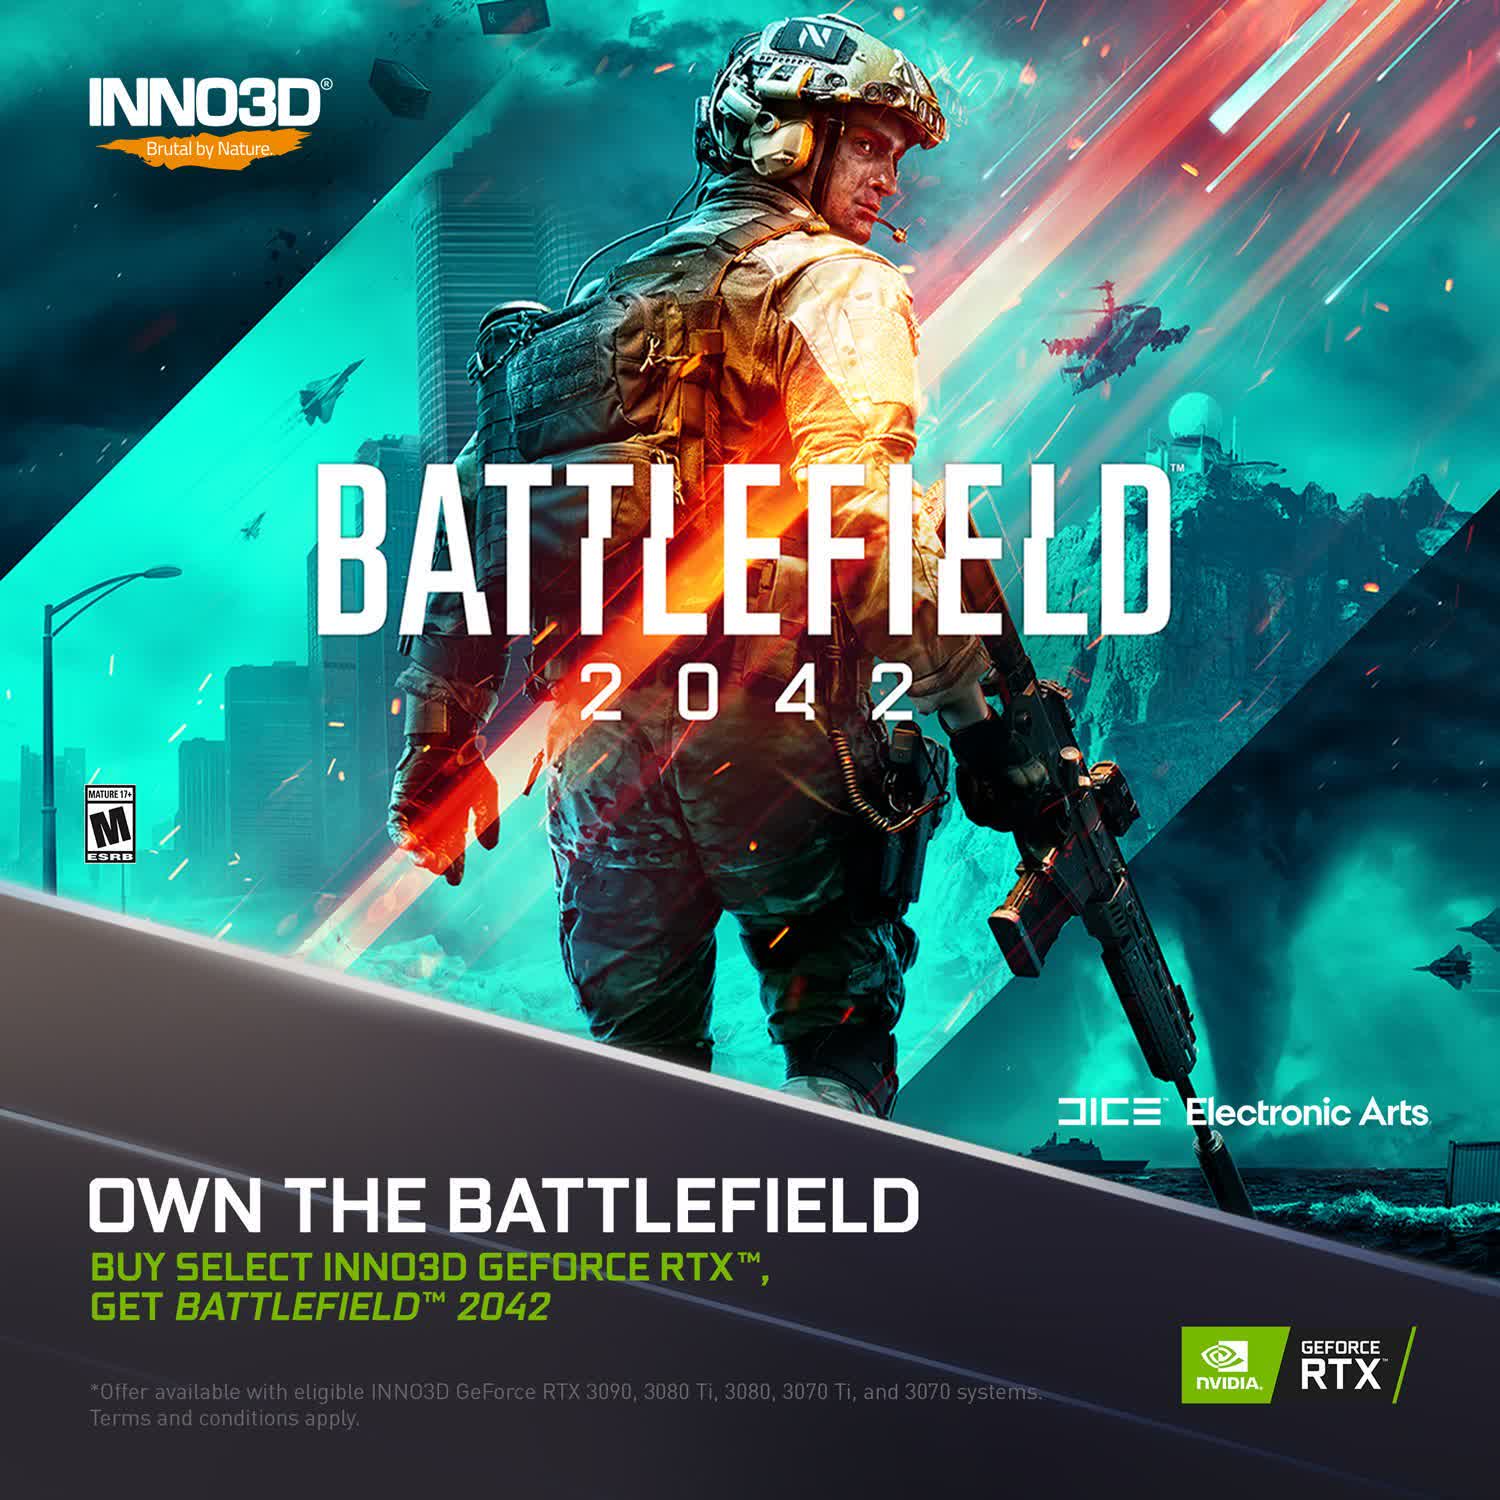 Nvidia is giving away free copies of Battlefield 2042 with its RTX 30 Series bundle